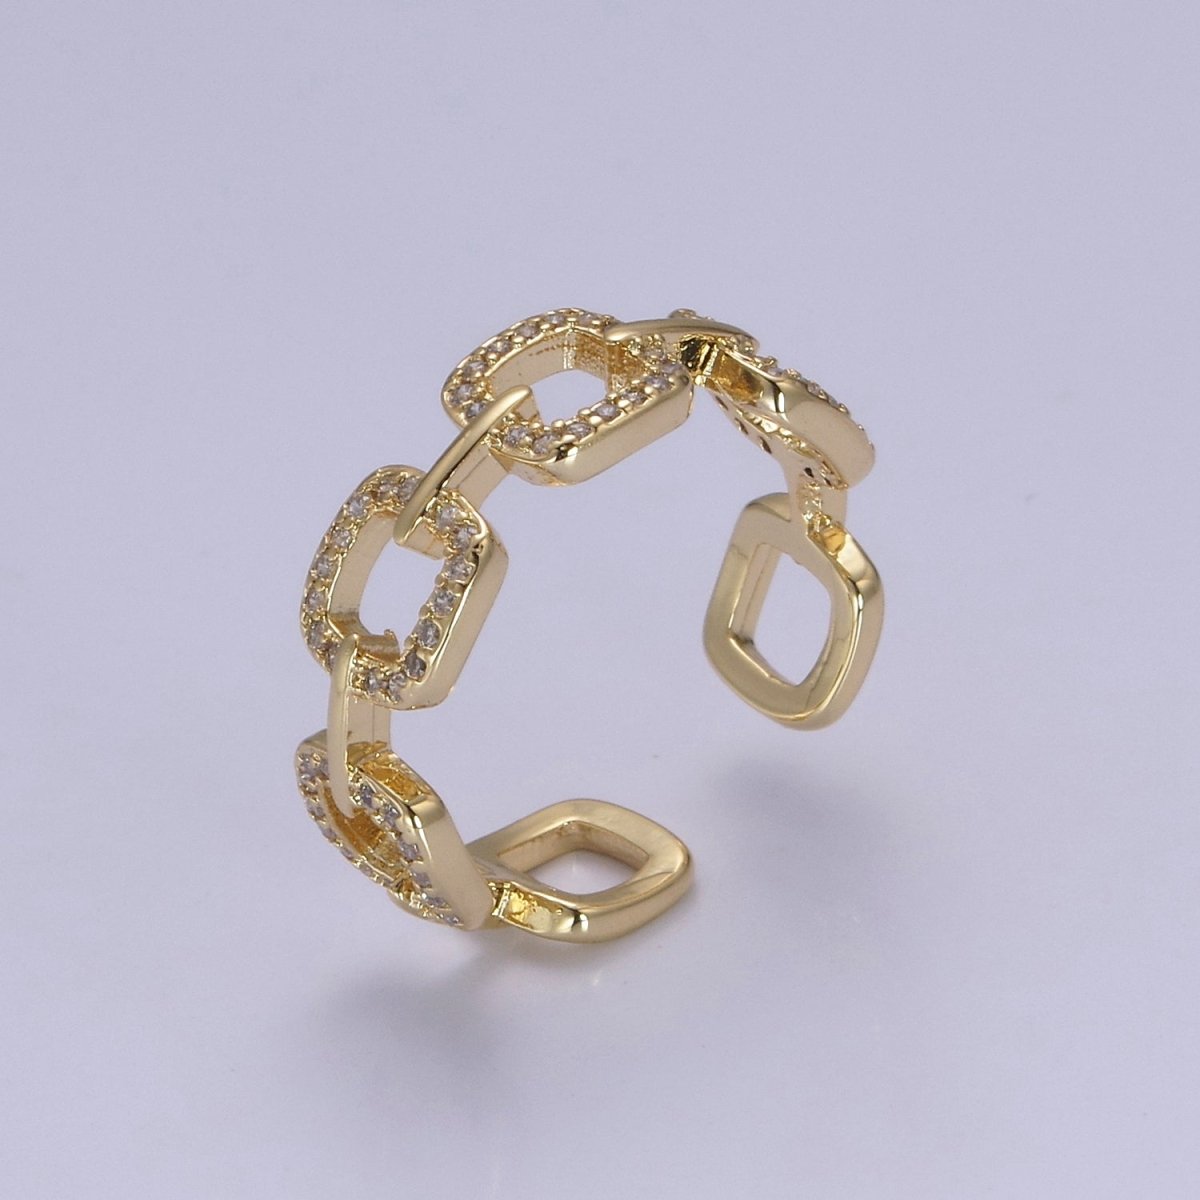 Chain Link CZ Cystral Paved Ring -Iced out chain link Ring, 14K Gold Filled ring, Staking Trendy ring S-389 - DLUXCA